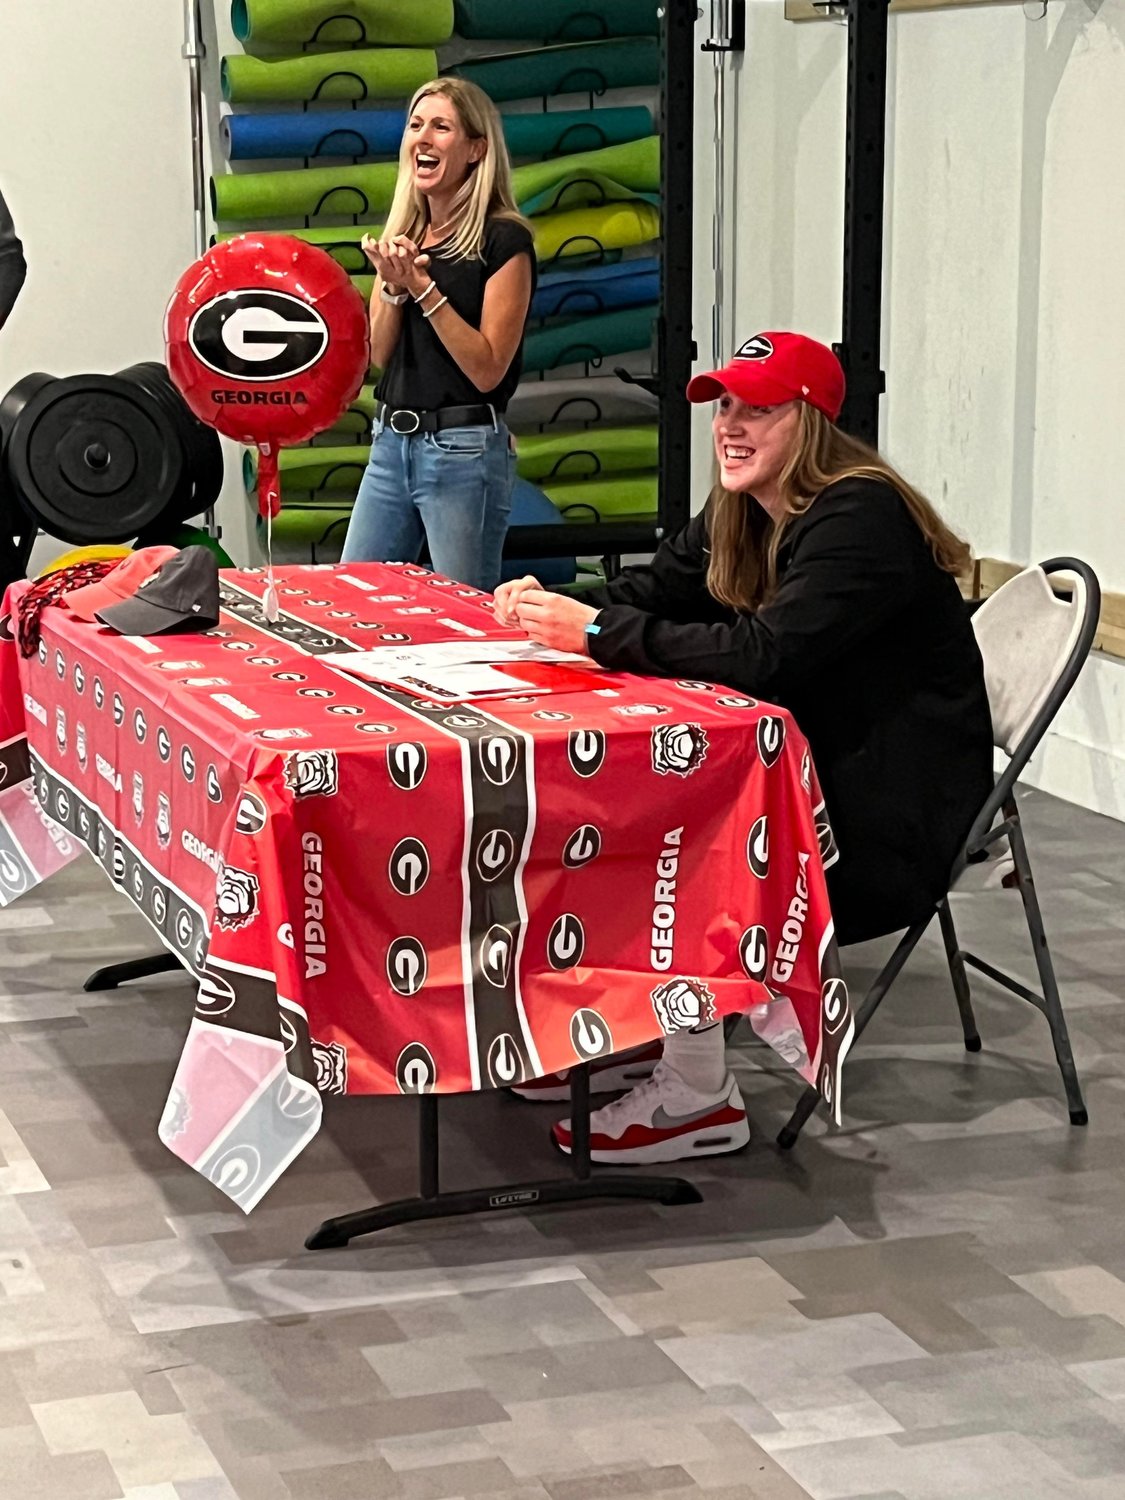 Fresh off a state title, Annie Wholgemuth signed a swimming scholarship to the University of Georgia.